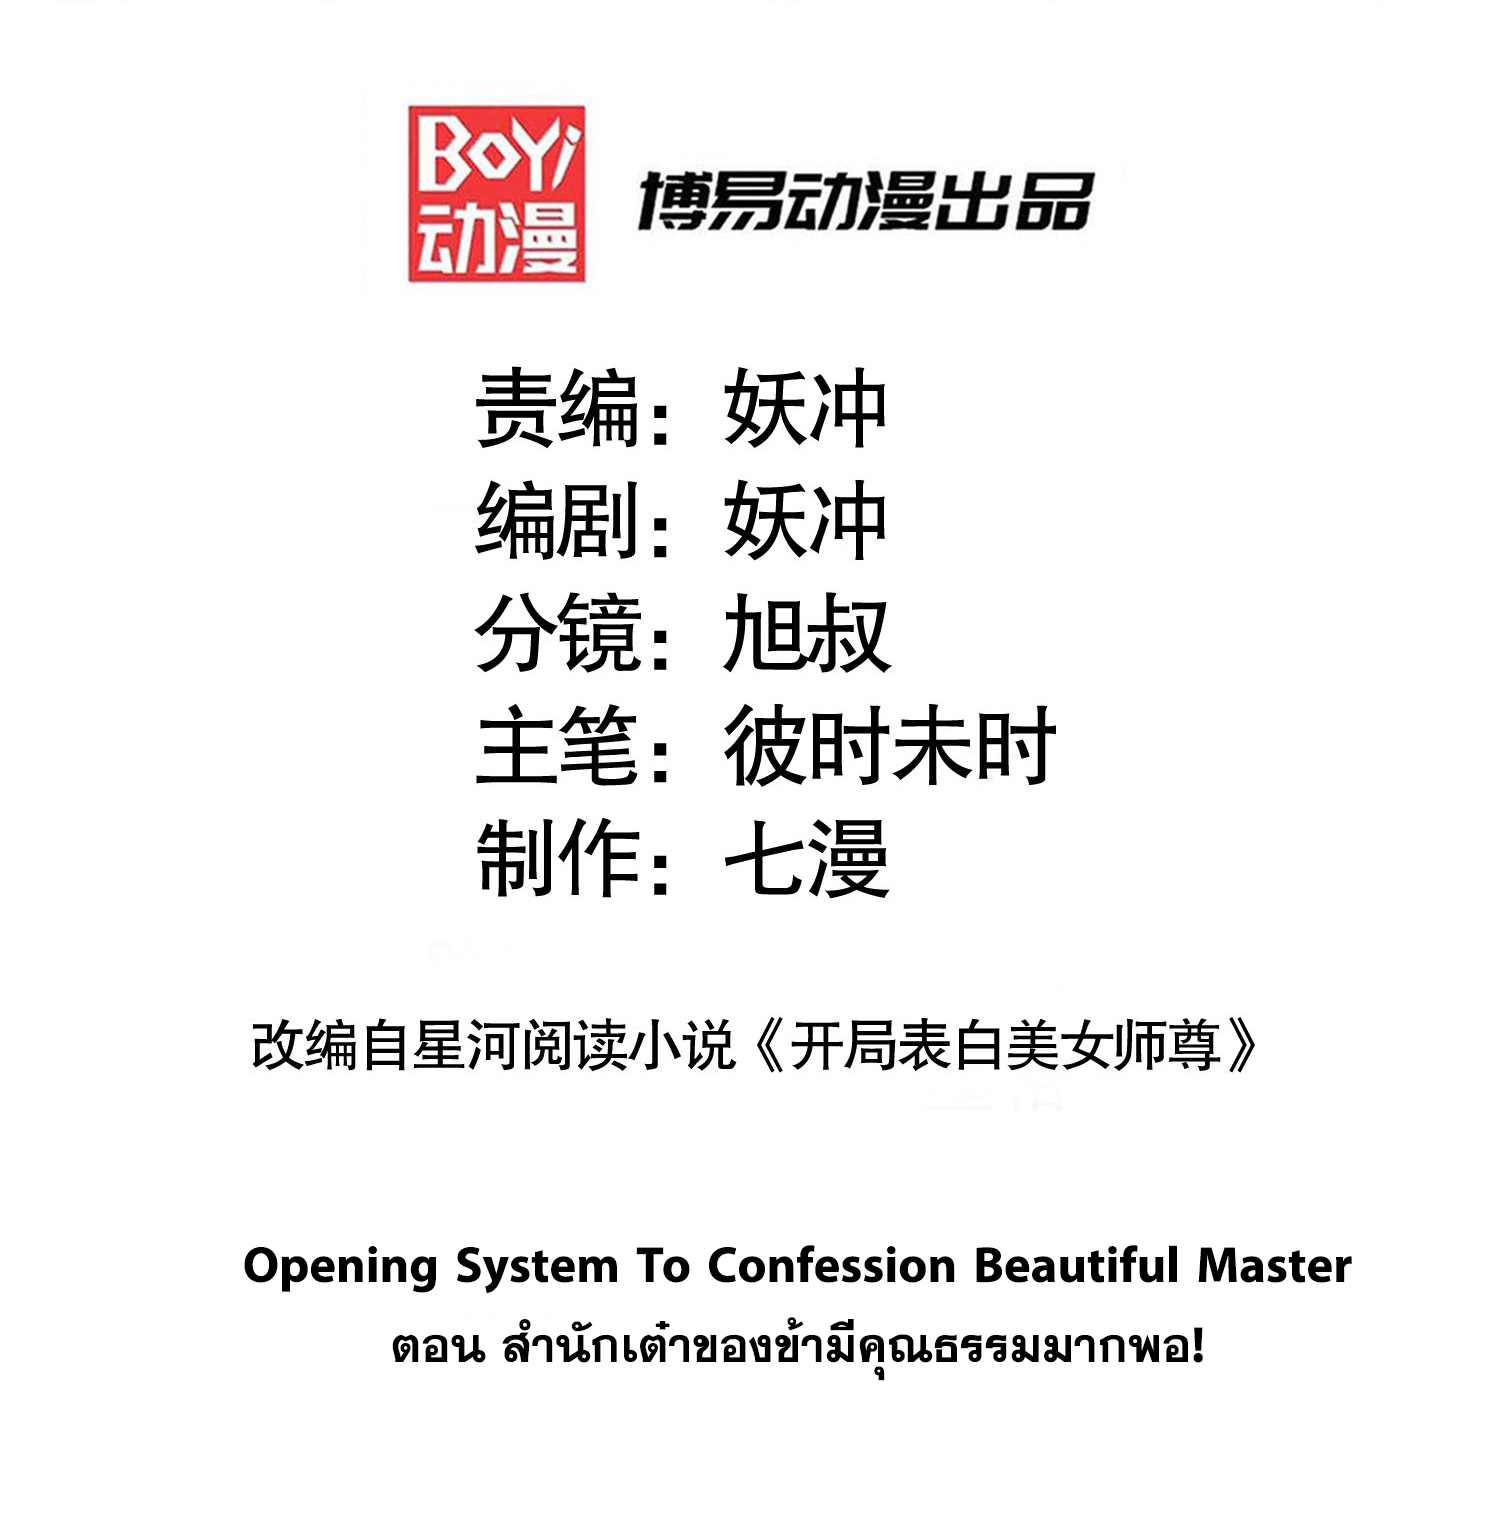 Opening System To Confession Beautiful Master 20 (2)